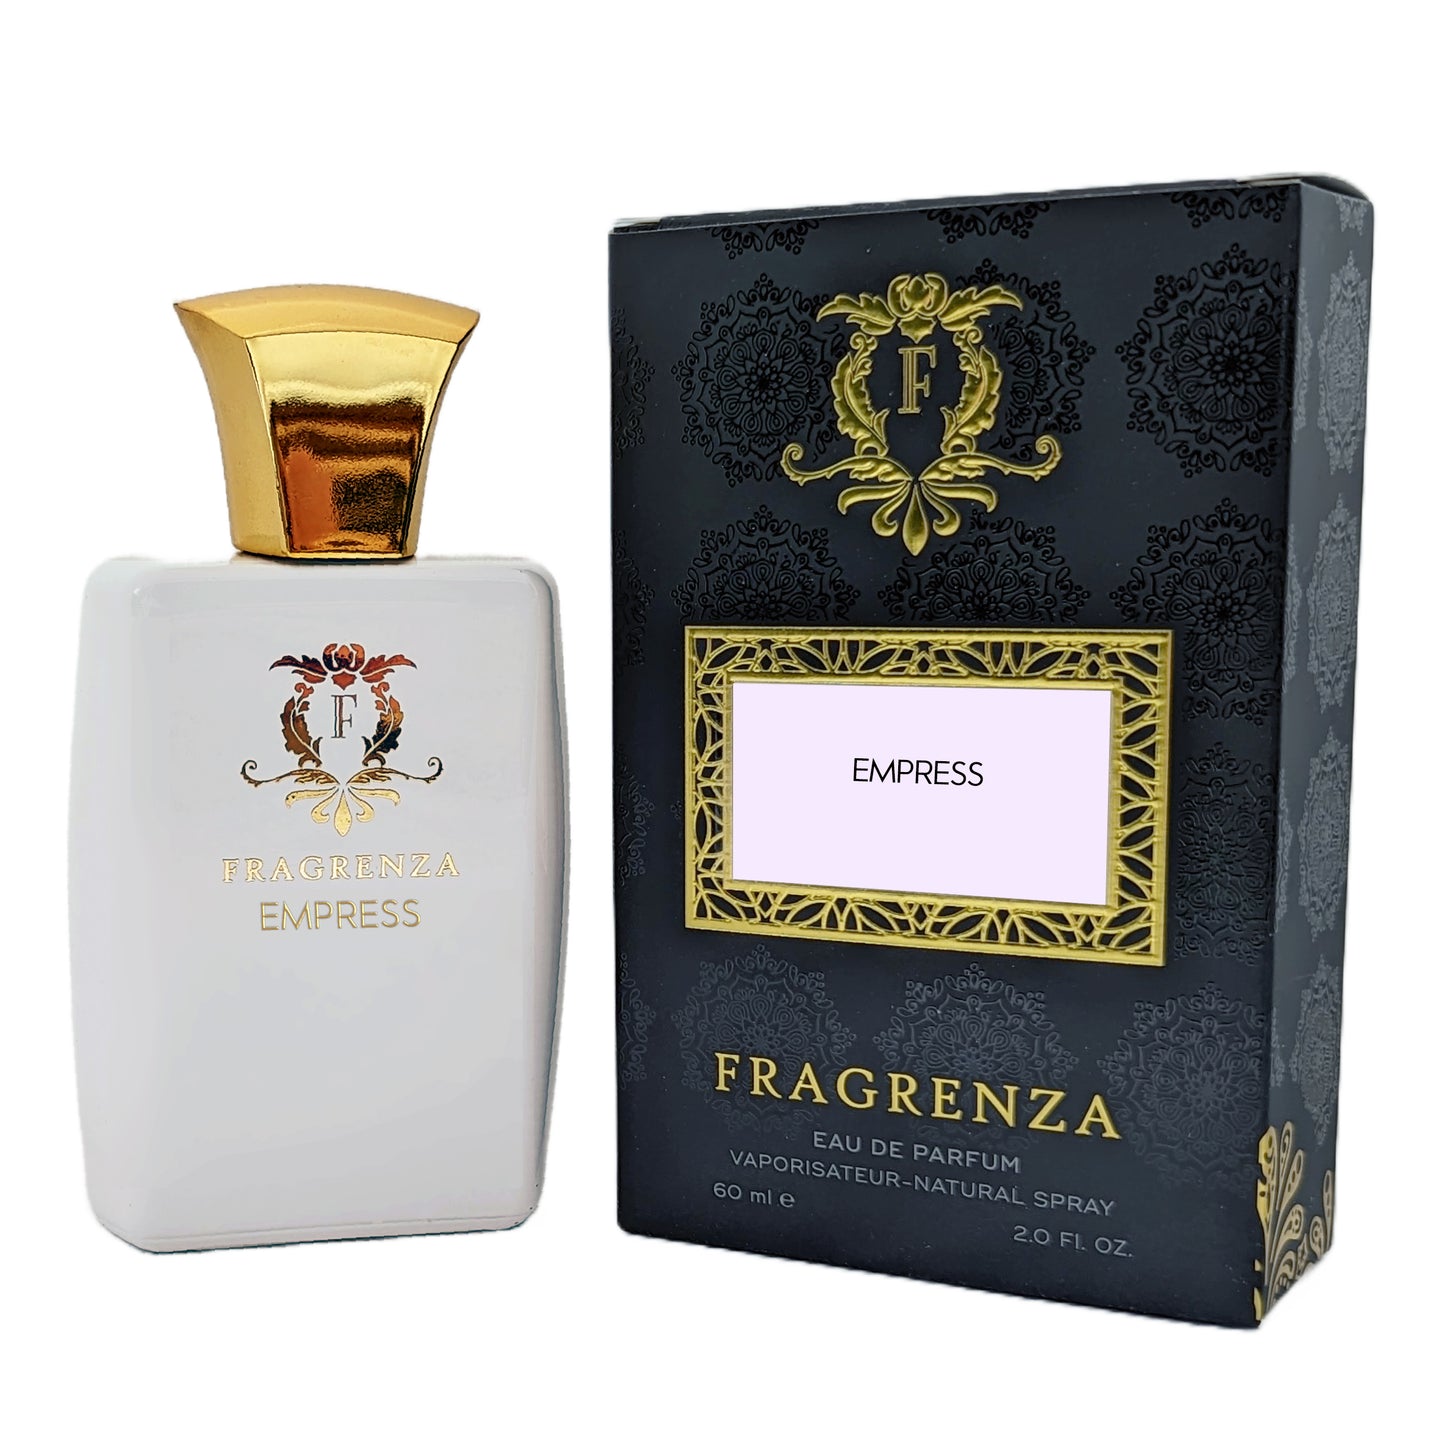 Dolce & Gabbana L'Imperatrice Limited Edition dupe